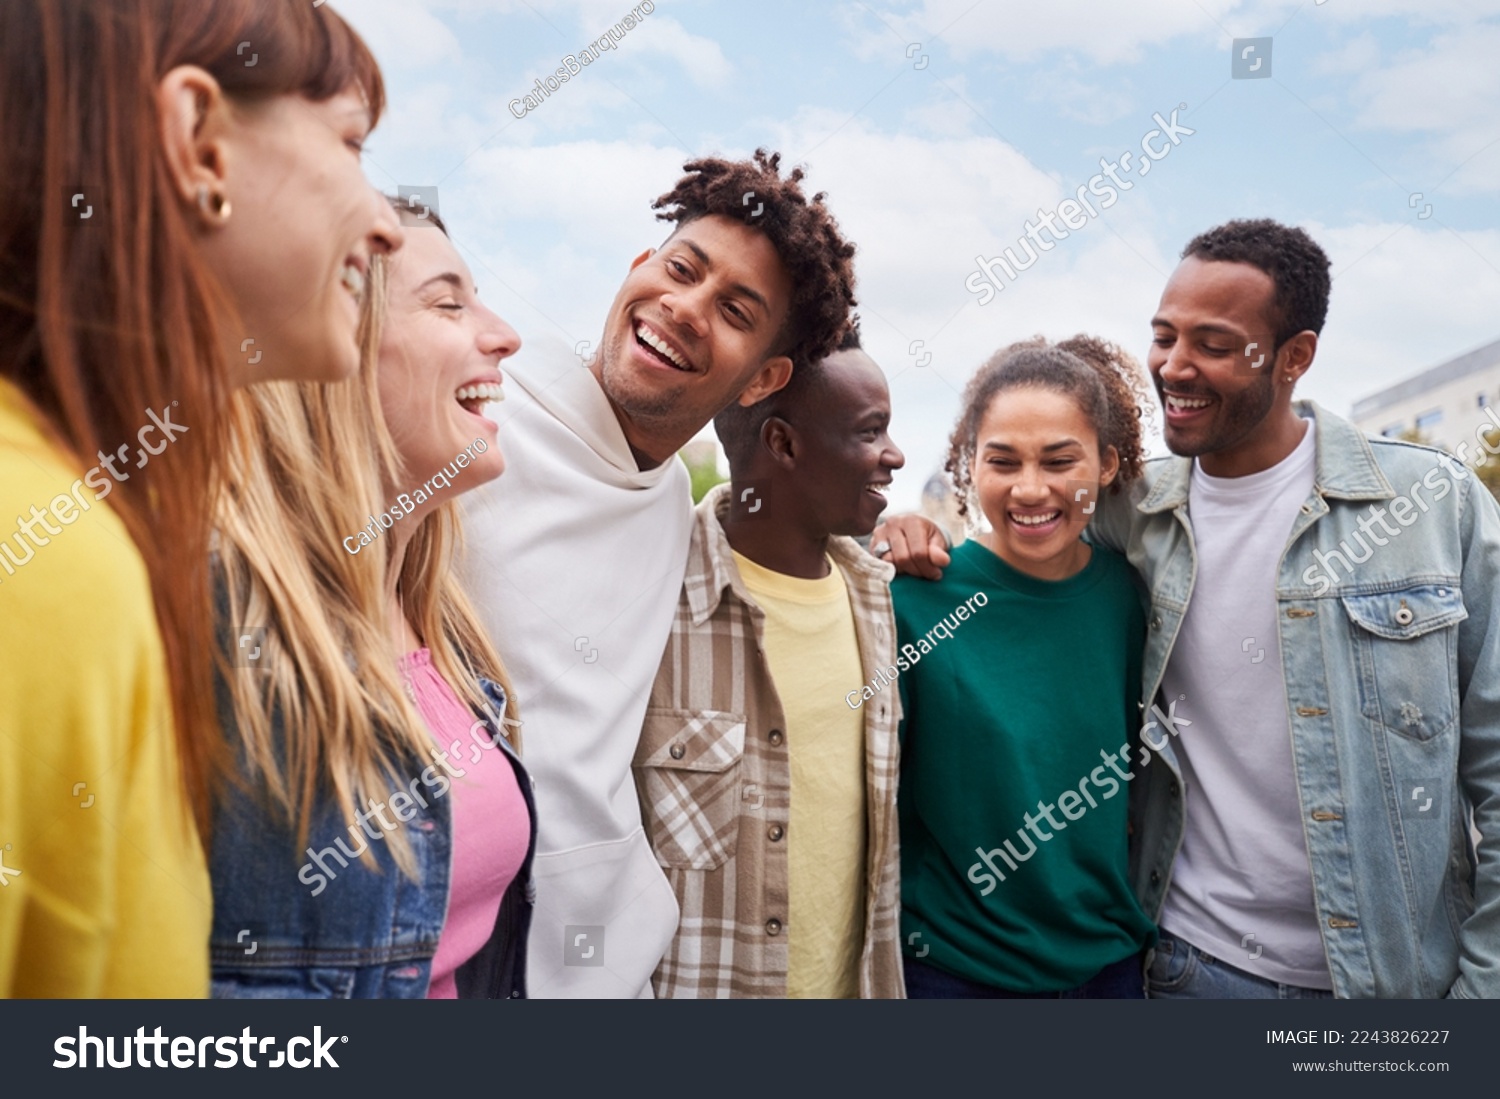 Young people walking laughing Happy friendship group of mixed race people cheerful together outdoors. Smiling students having fun during a travel trip. Multi-ethnic men and women hugging at the city #2243826227